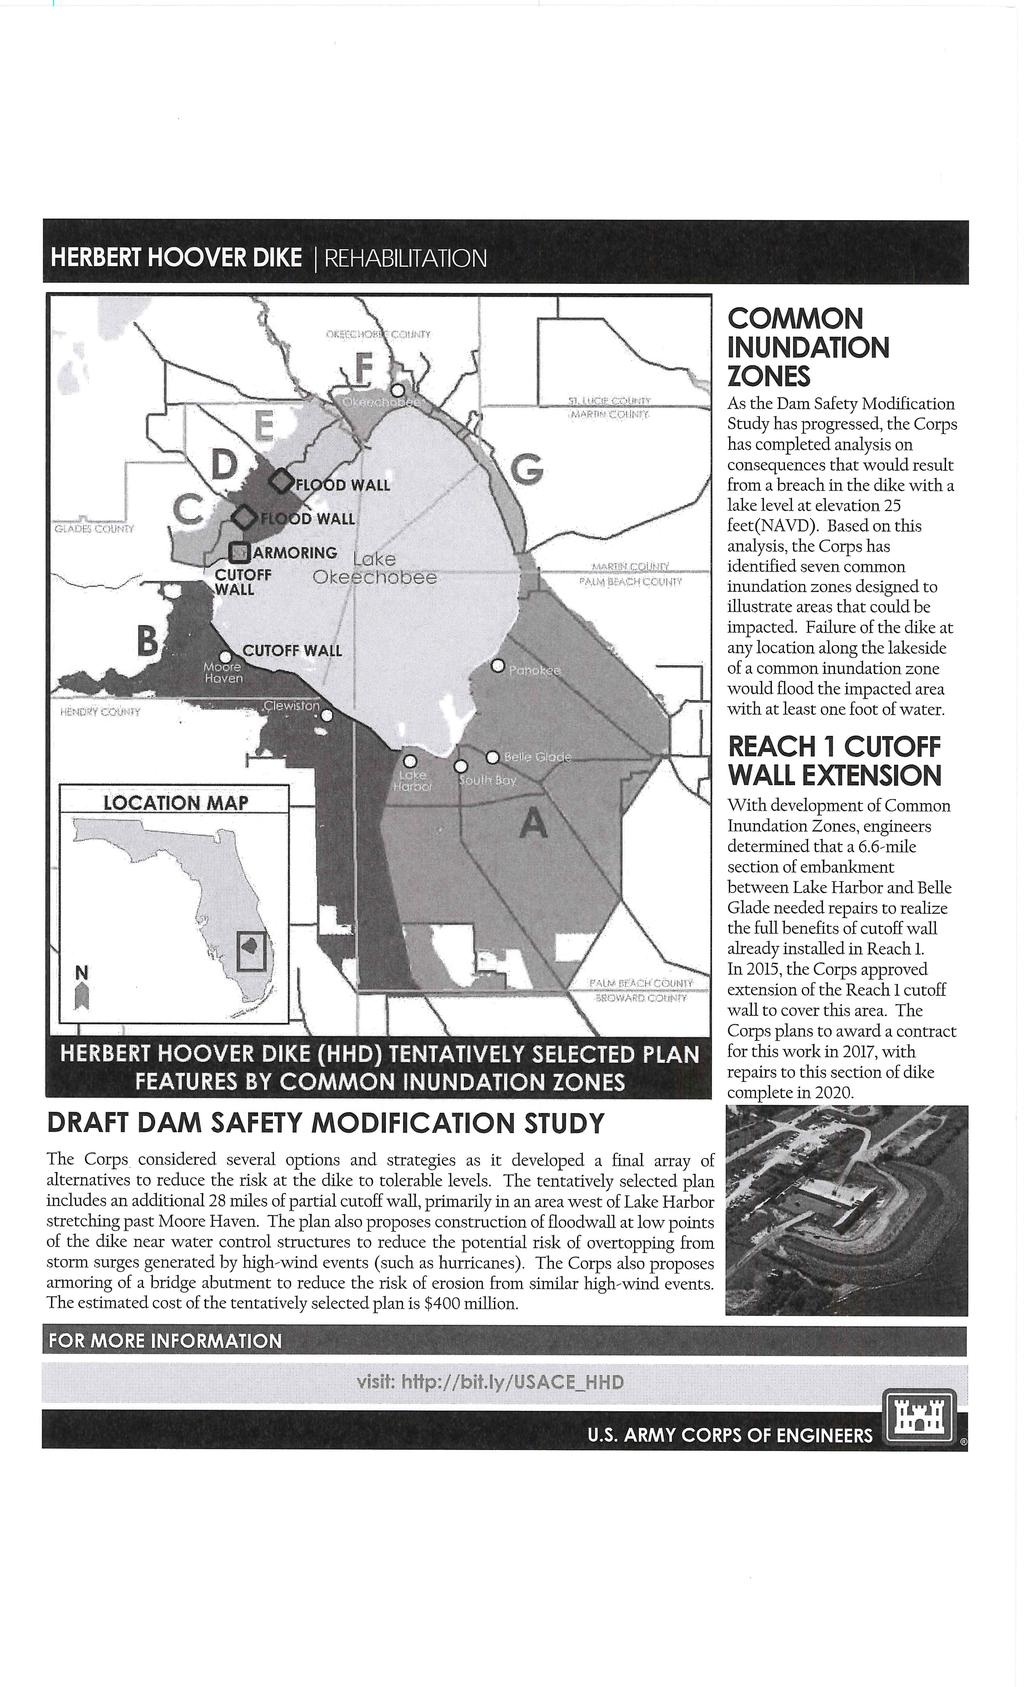 HERBERT HOOVER DIKE I REHABILITATION I COMMON INUNDATION ZONES As the Dam Safety Modification Study has progressed, the Corps has completed analysis on consequences that would result from a breach in